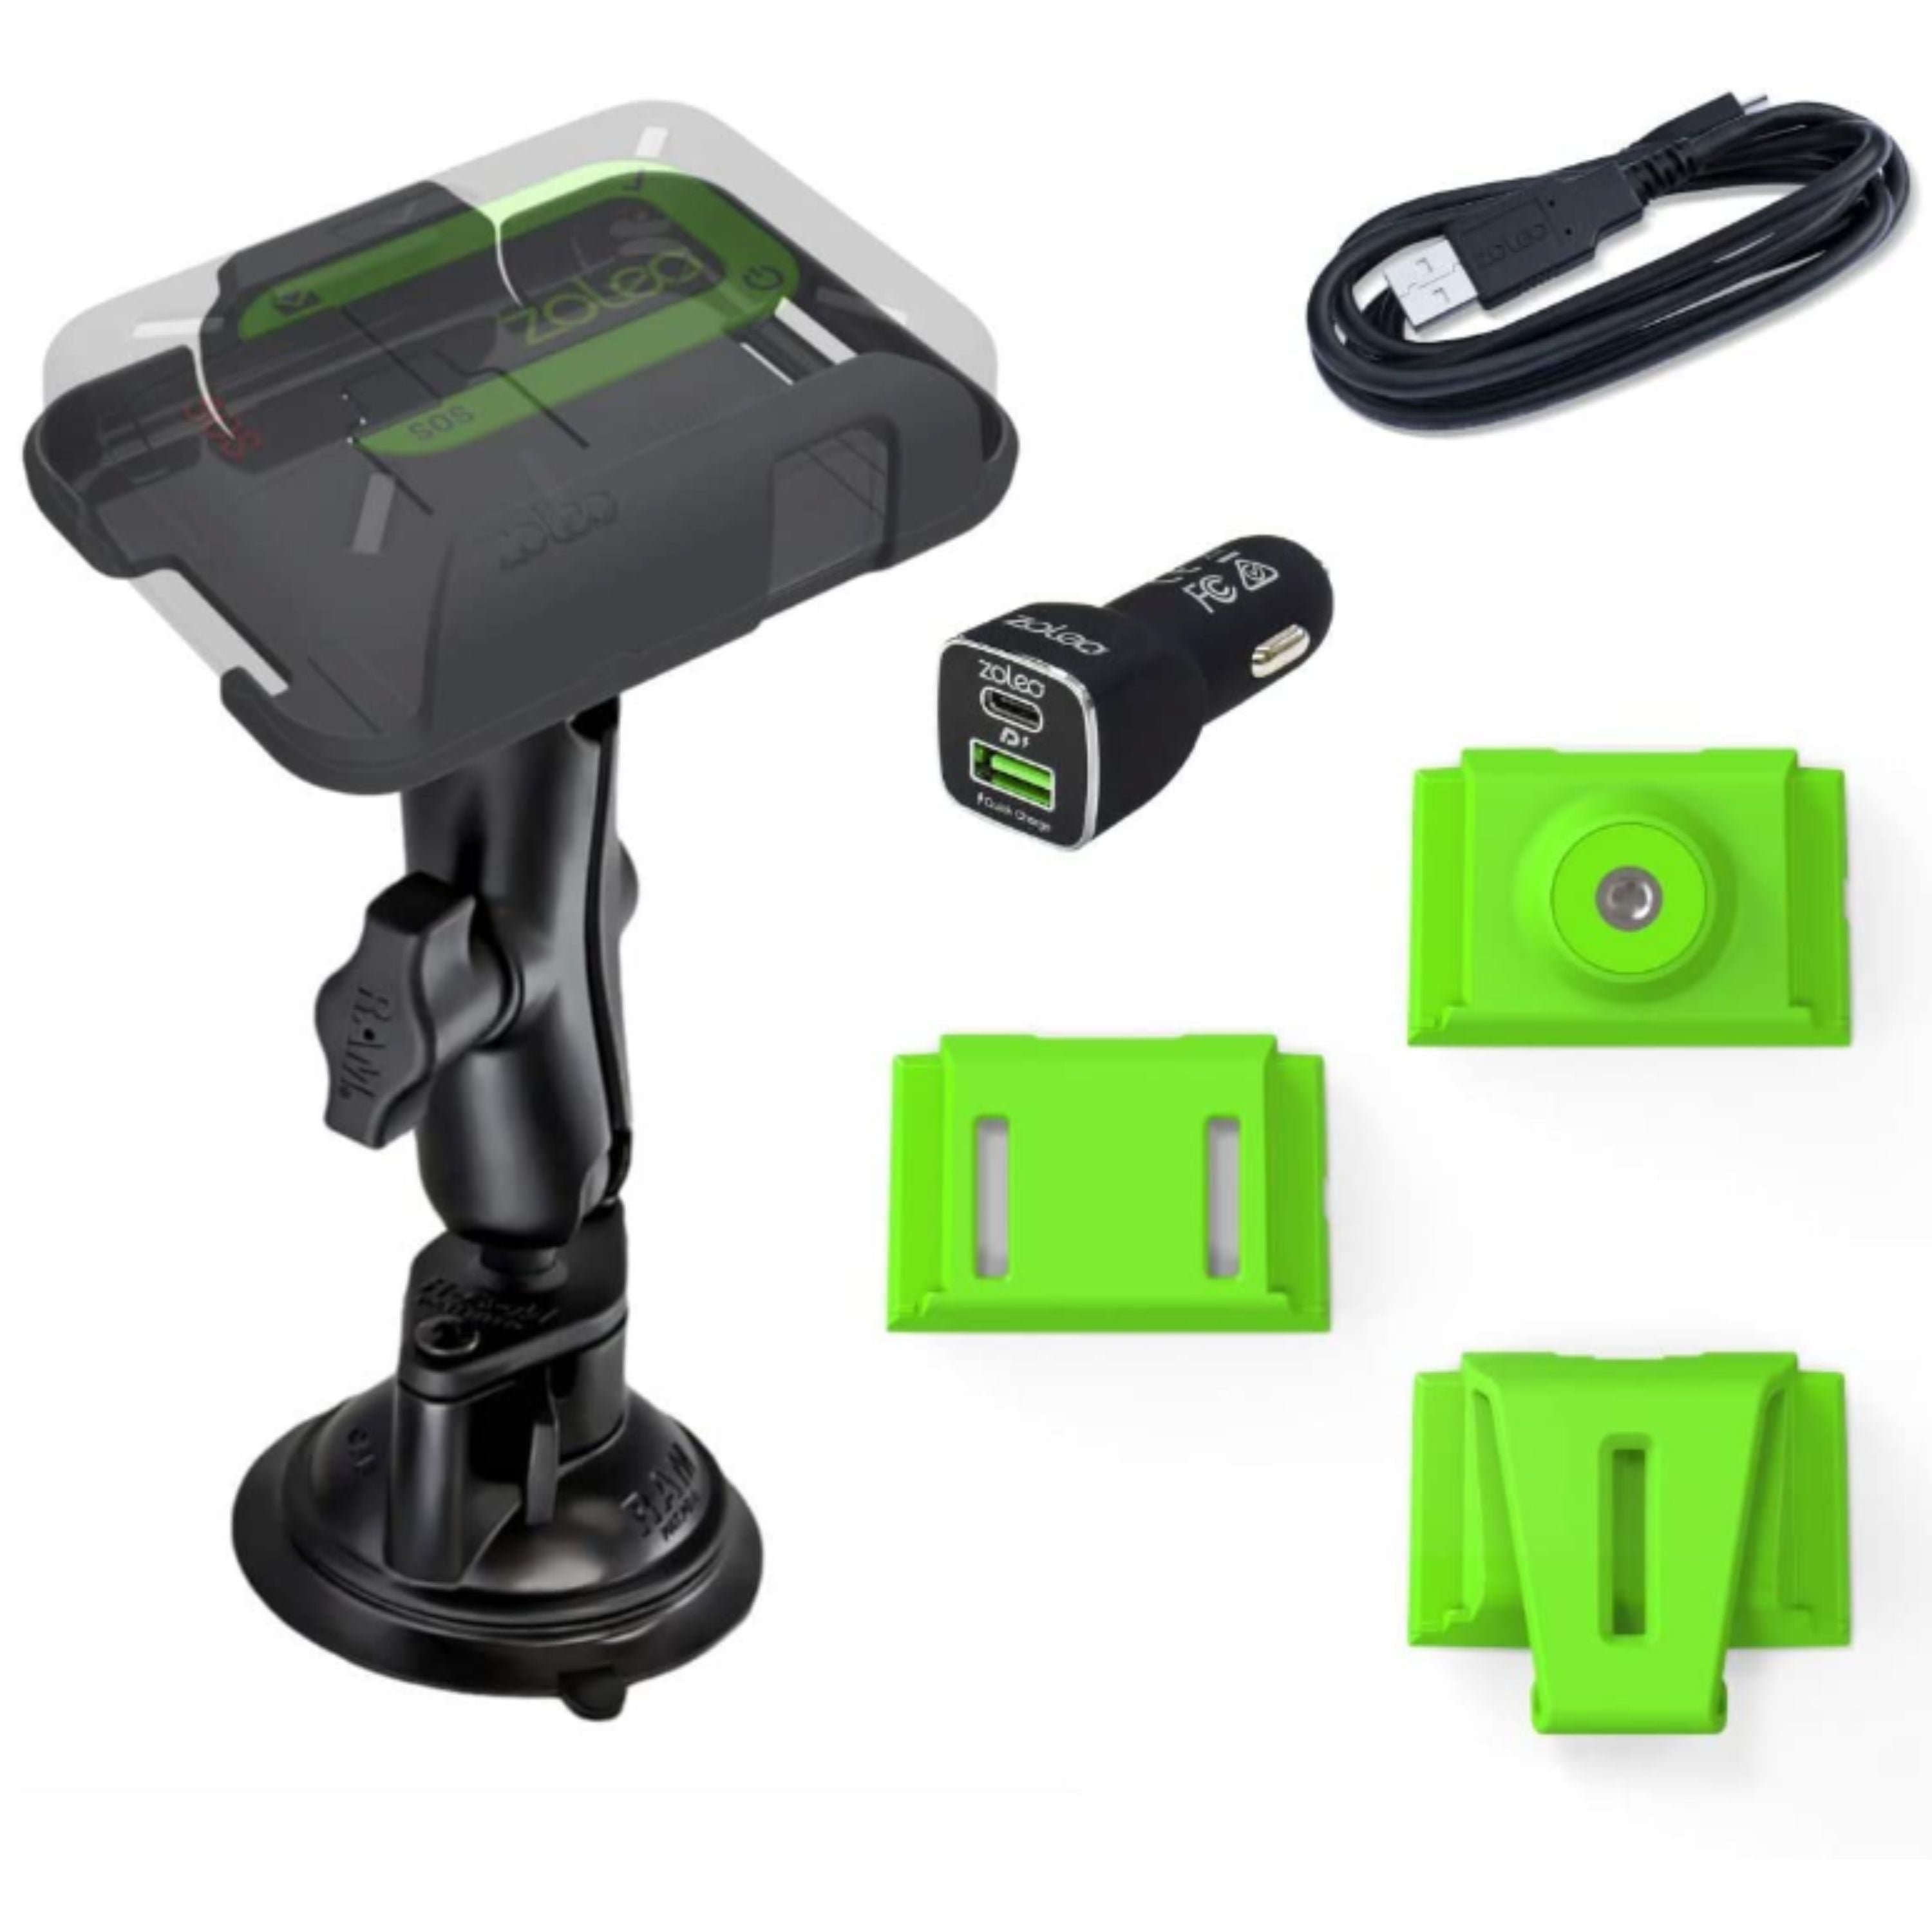 Zoleo universal mount with suction cup